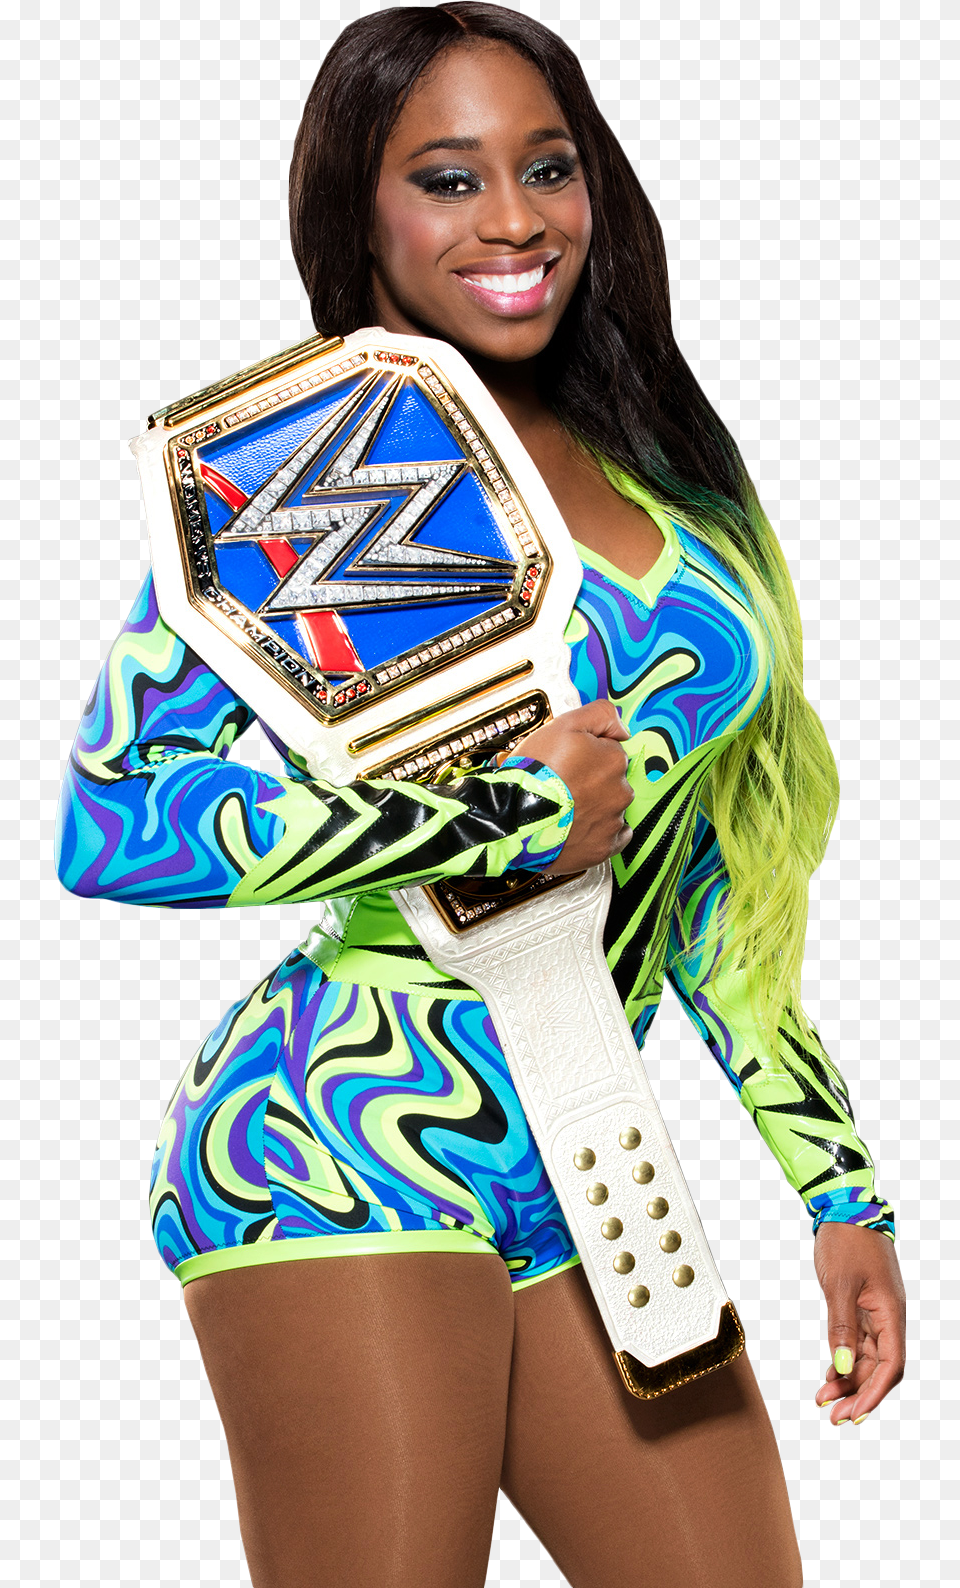 John Cena Wwe Championship Naomi Smackdown Women39s Champion, Accessories, Adult, Female, Person Free Png Download